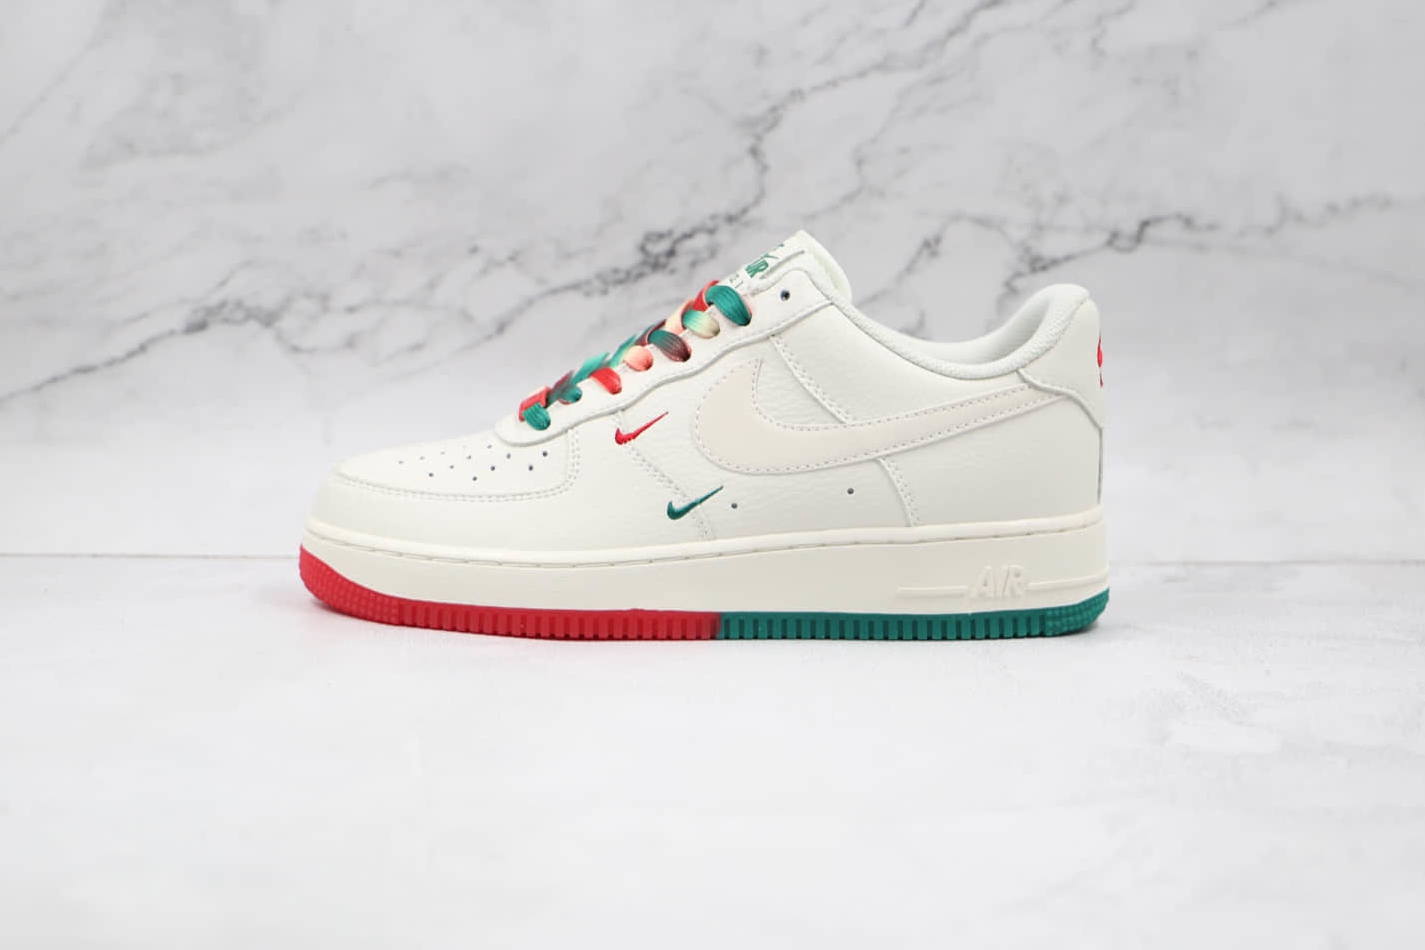 Nike Air Force 1 Low 07 White Green University Red BU6638-180 - Stylish Sneakers for All-Day Comfort